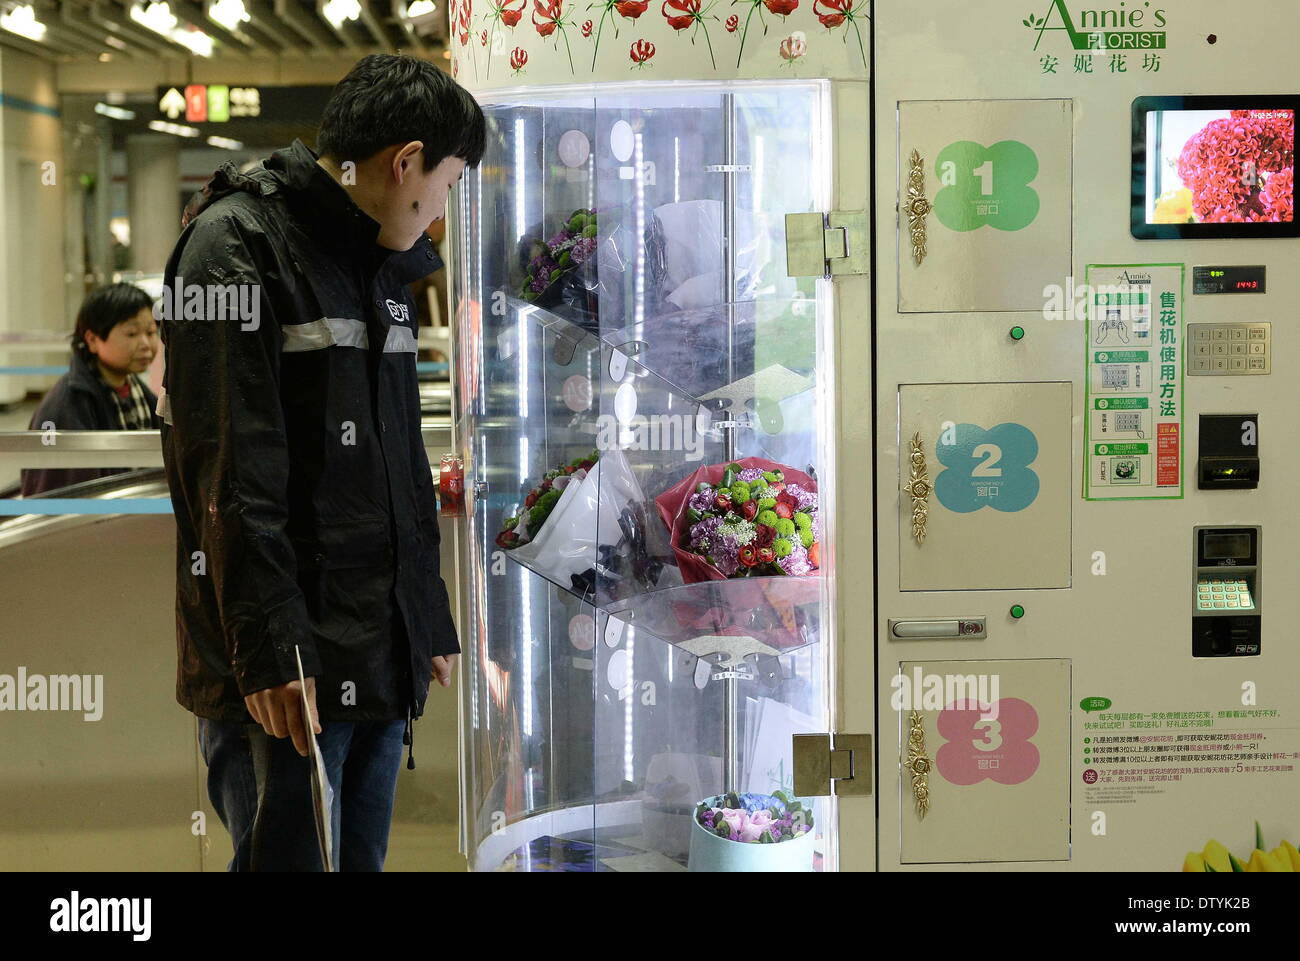 Shanghai. 25th Feb, 2014. A man looks at the bouquets of flowers inside a flower vending machine at a subway station in east China's Shanghai, Feb. 25, 2014. Through the vending machine, people can get flowers conveniently after inserting money for payment. © Lai Xinlin/Xinhua/Alamy Live News Stock Photo